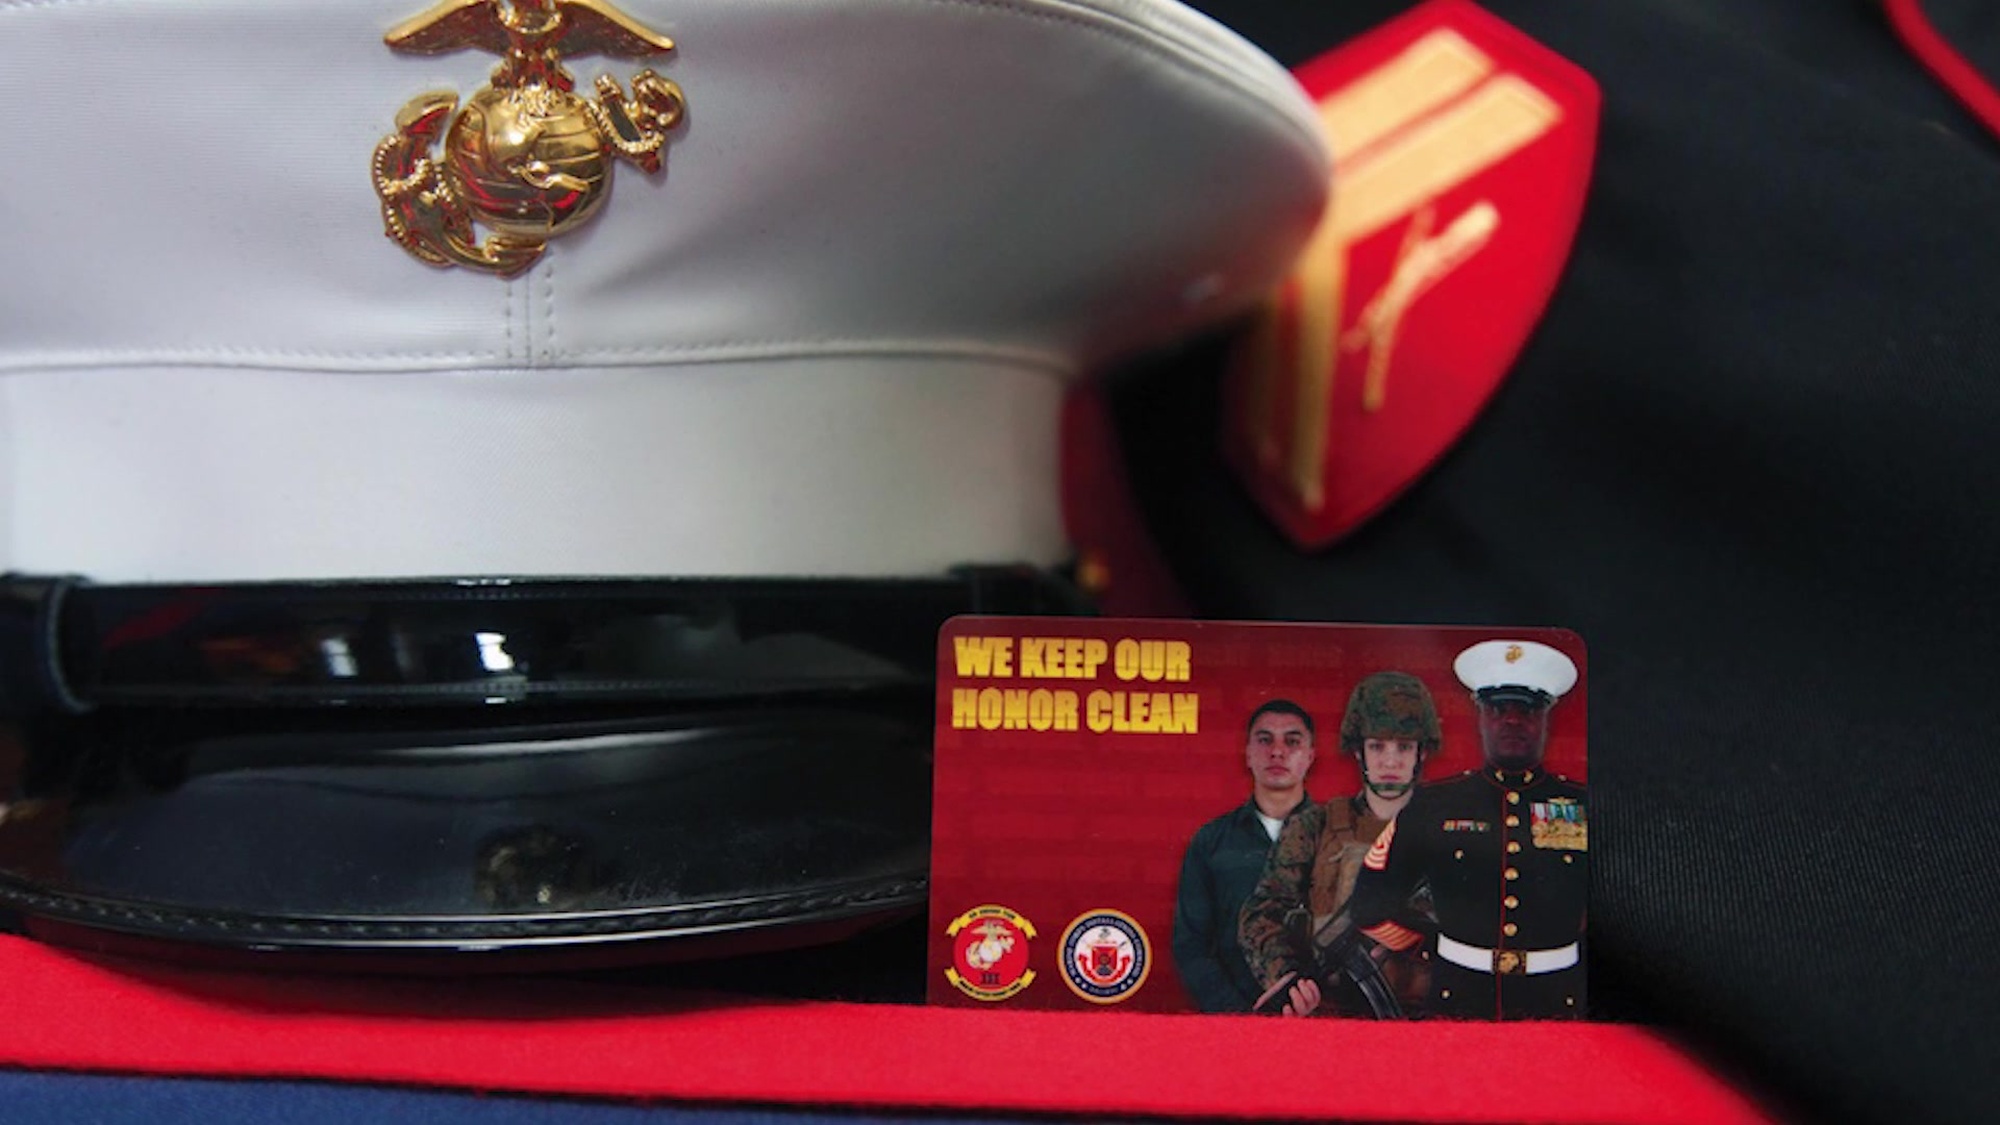 Image of a display that includes a Marine cover, jacket and a card depicting Marines.